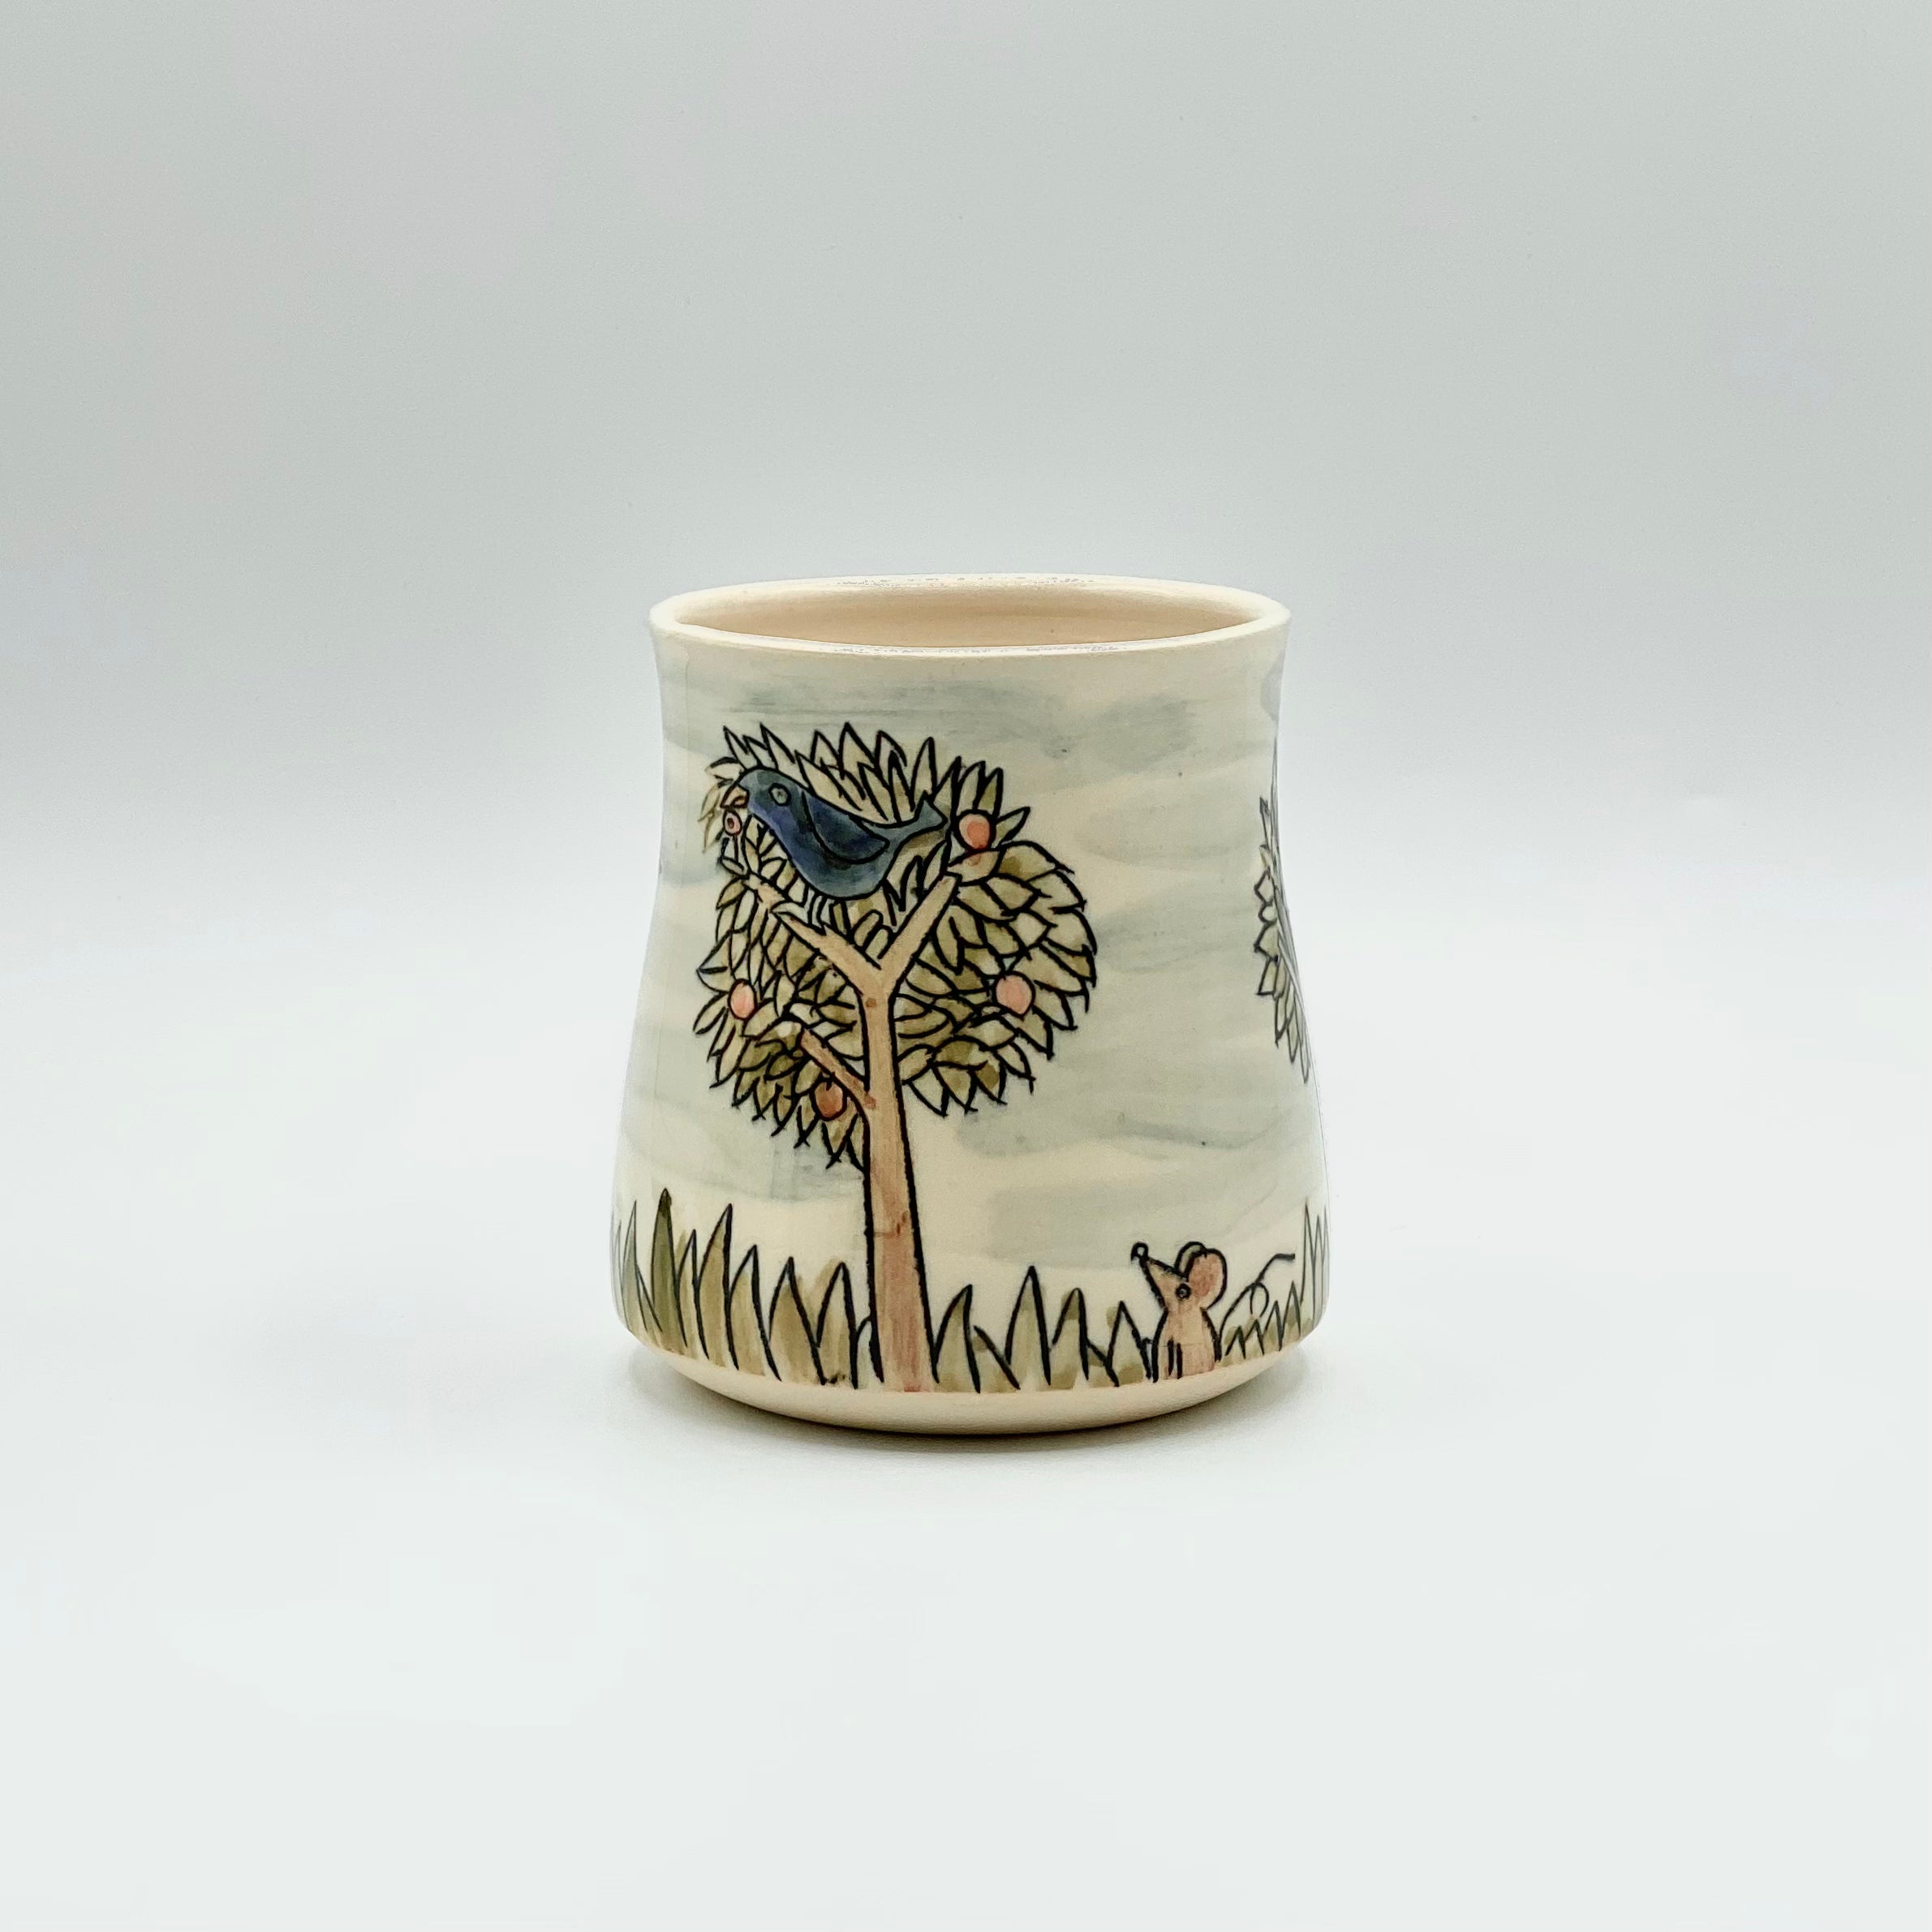 Aesop’s Fables Tumbler by Maru Pottery